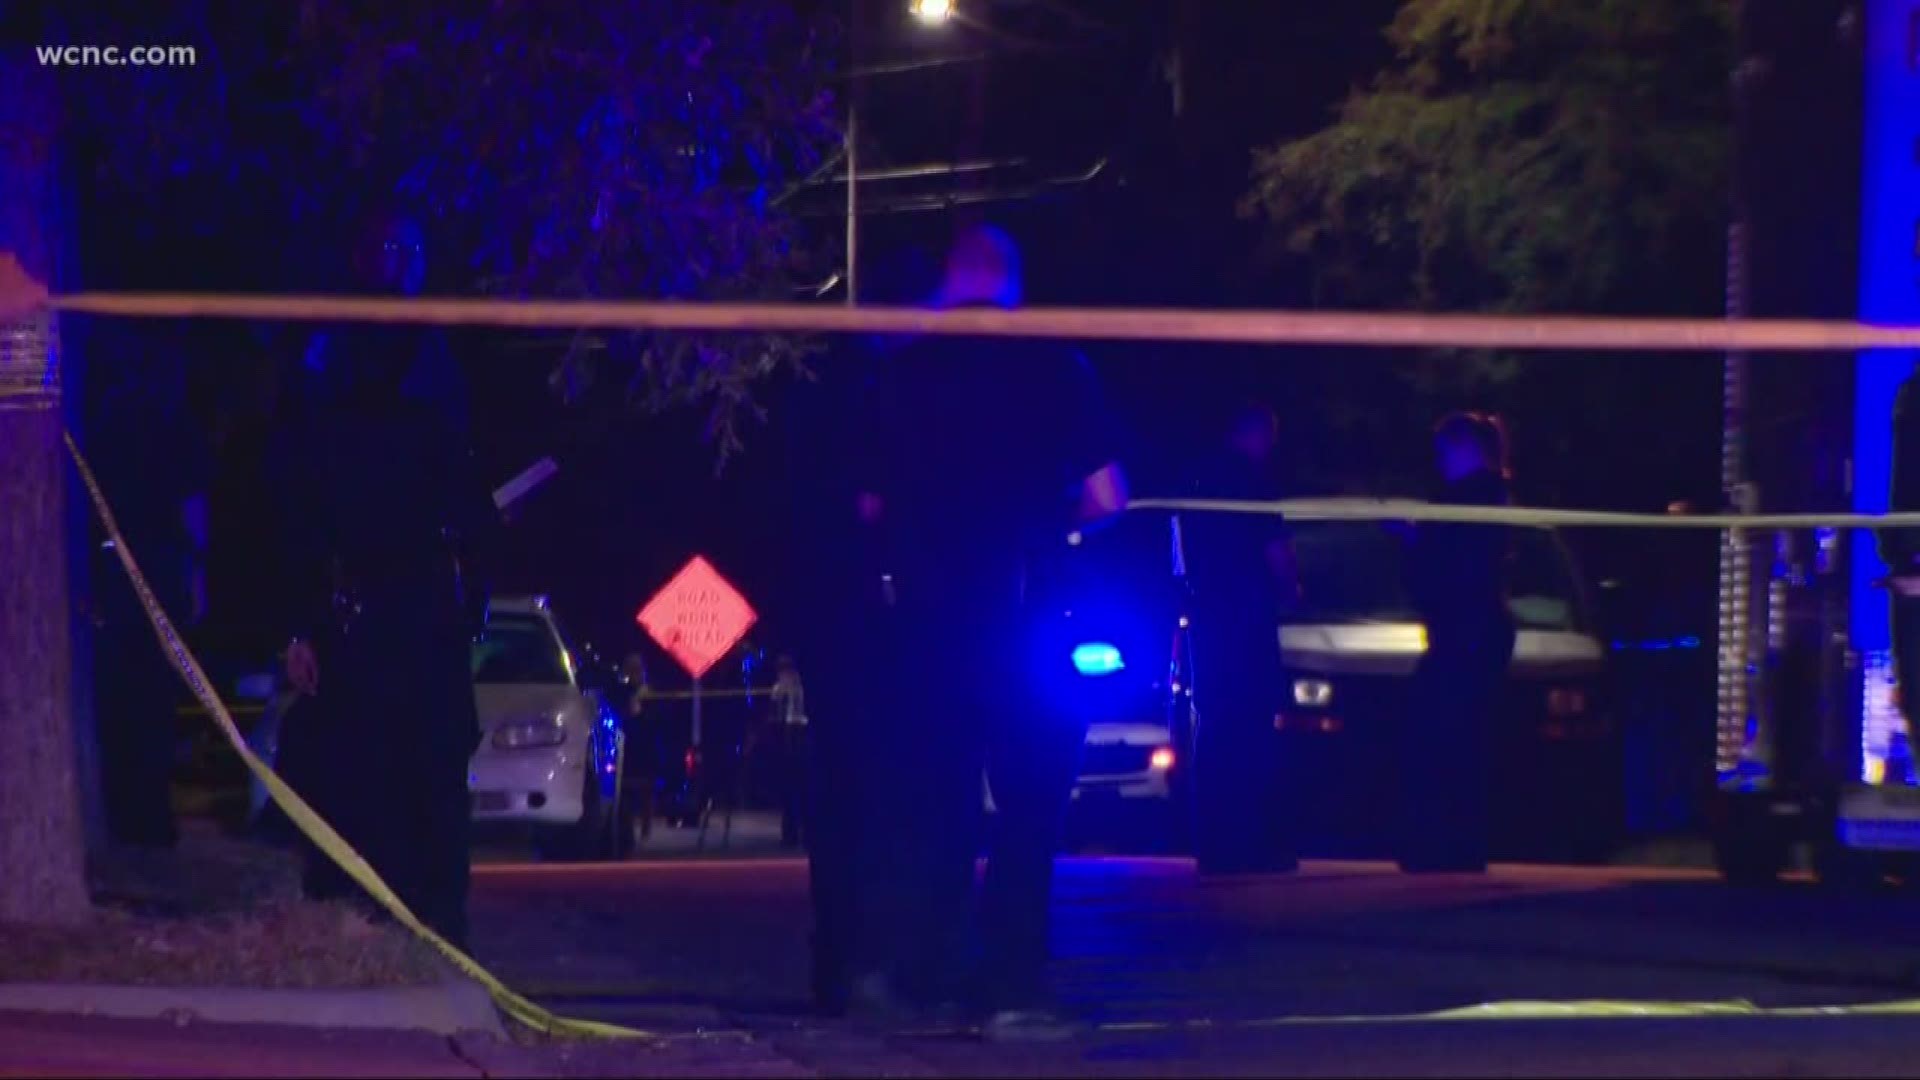 Two overnight shootings have brought the homicide count in Charlotte up to 95 this year.